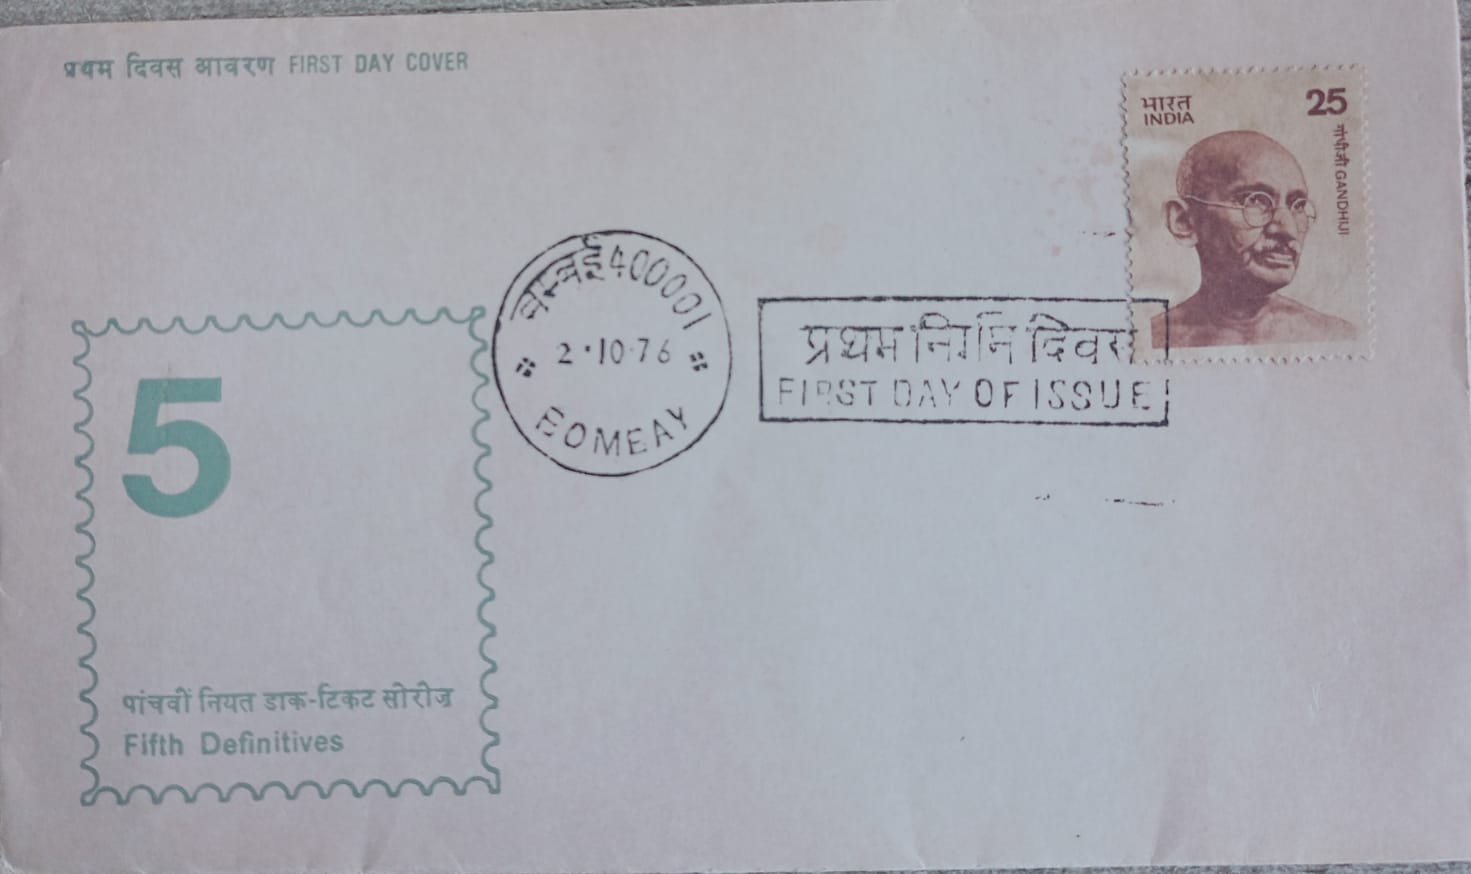 India 1976 Fifth Definitives Gandhi Ji First Day Cover